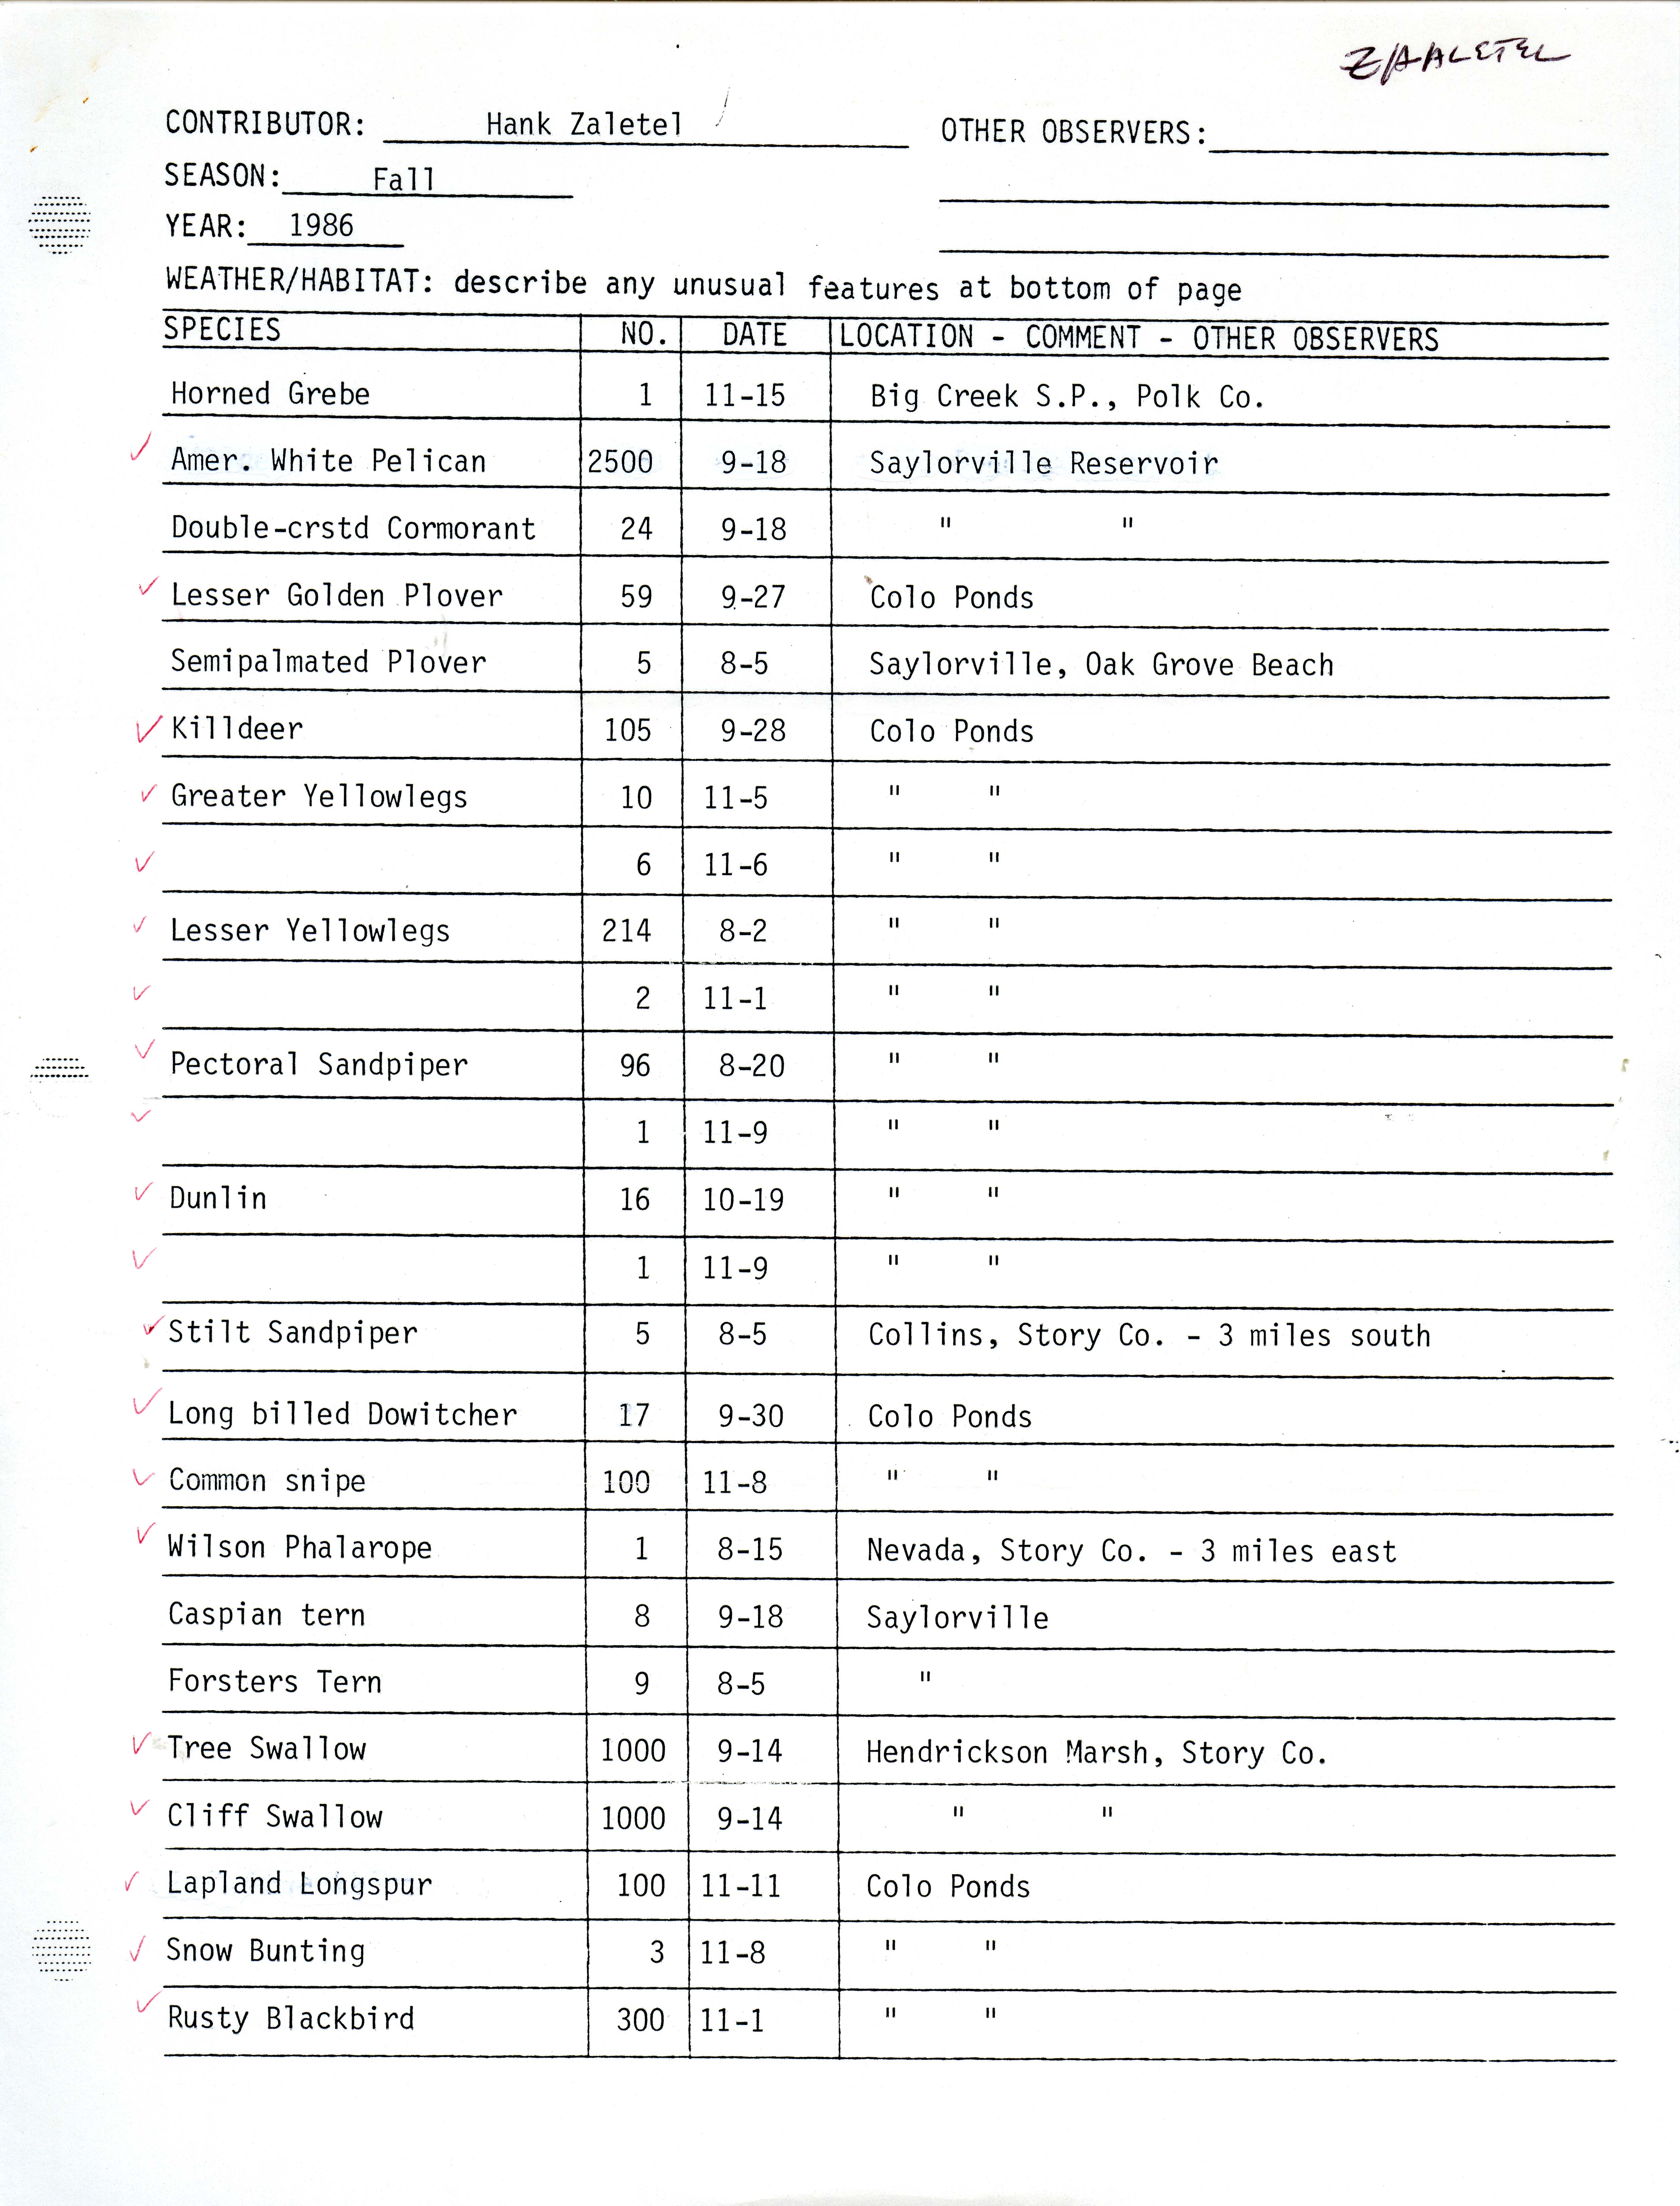 Field notes contributed by Hank Zaletel, fall 1986